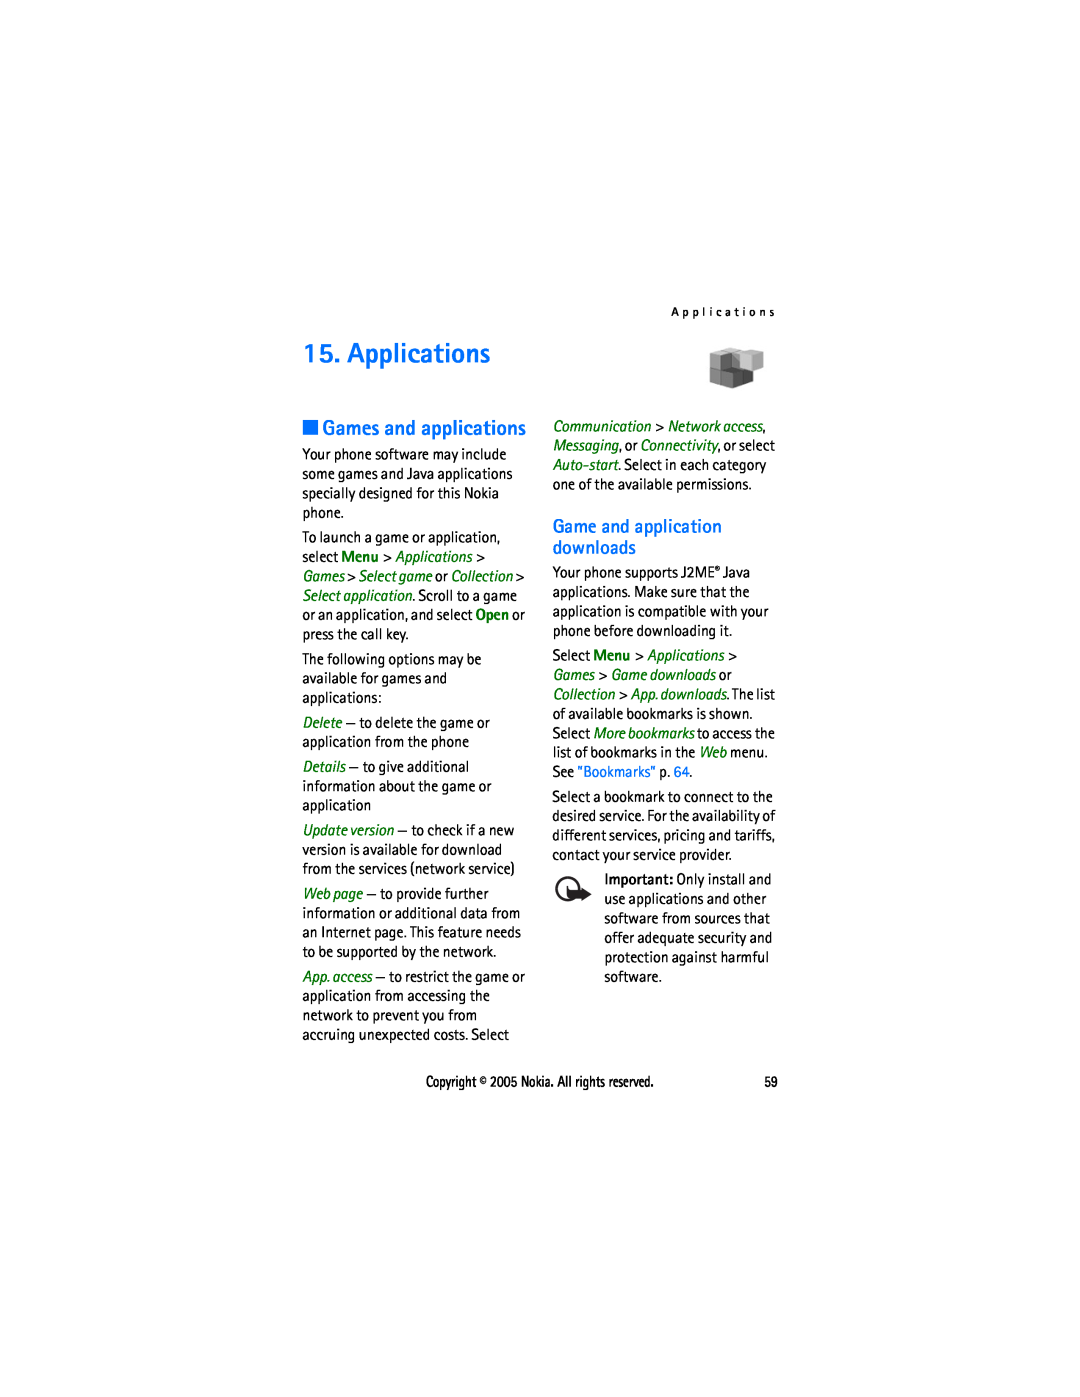 Sonic Alert 6021 Applications, Games and applications, The following options may be available for games and applications 